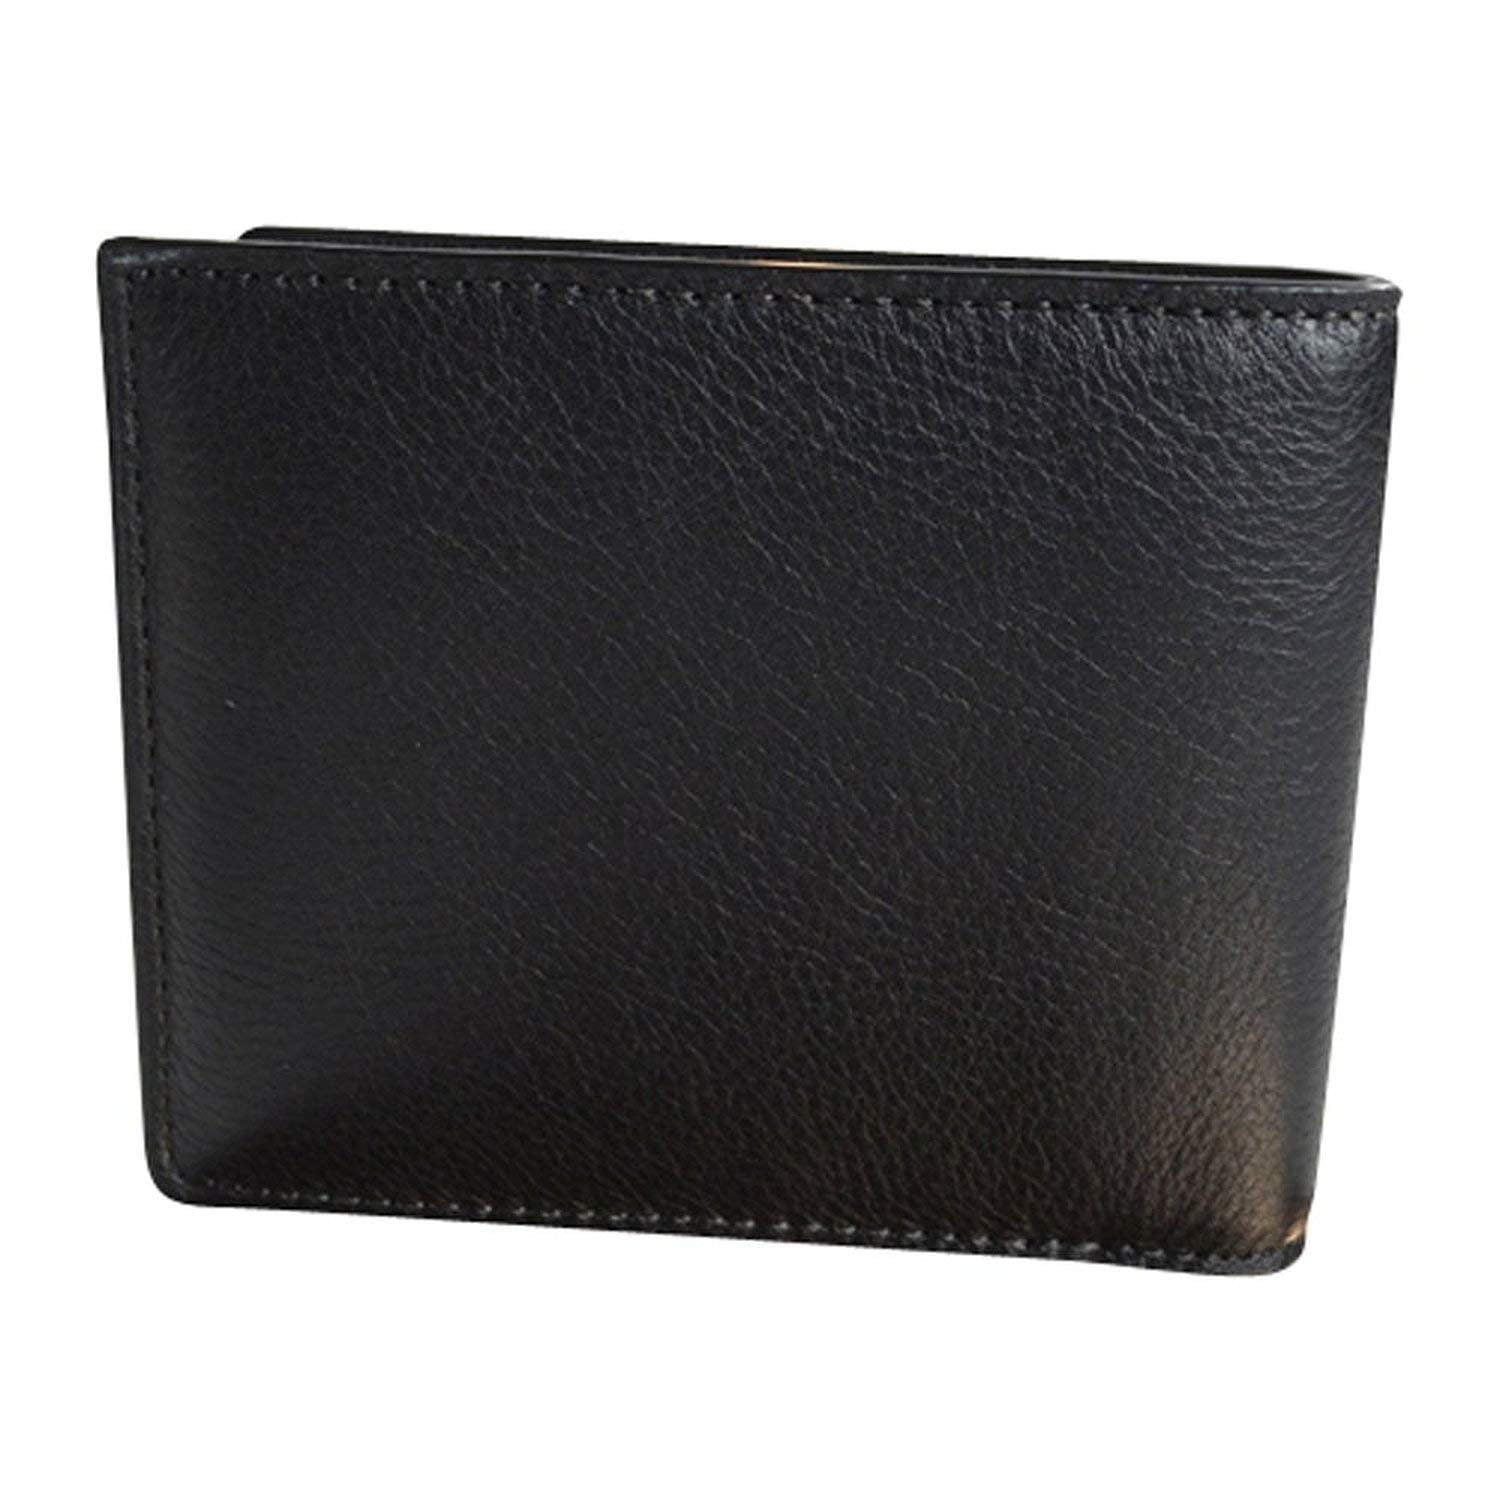 Buy COACH Compact ID Sport Calf Bifold Wallet in Black 74991 Online at ...